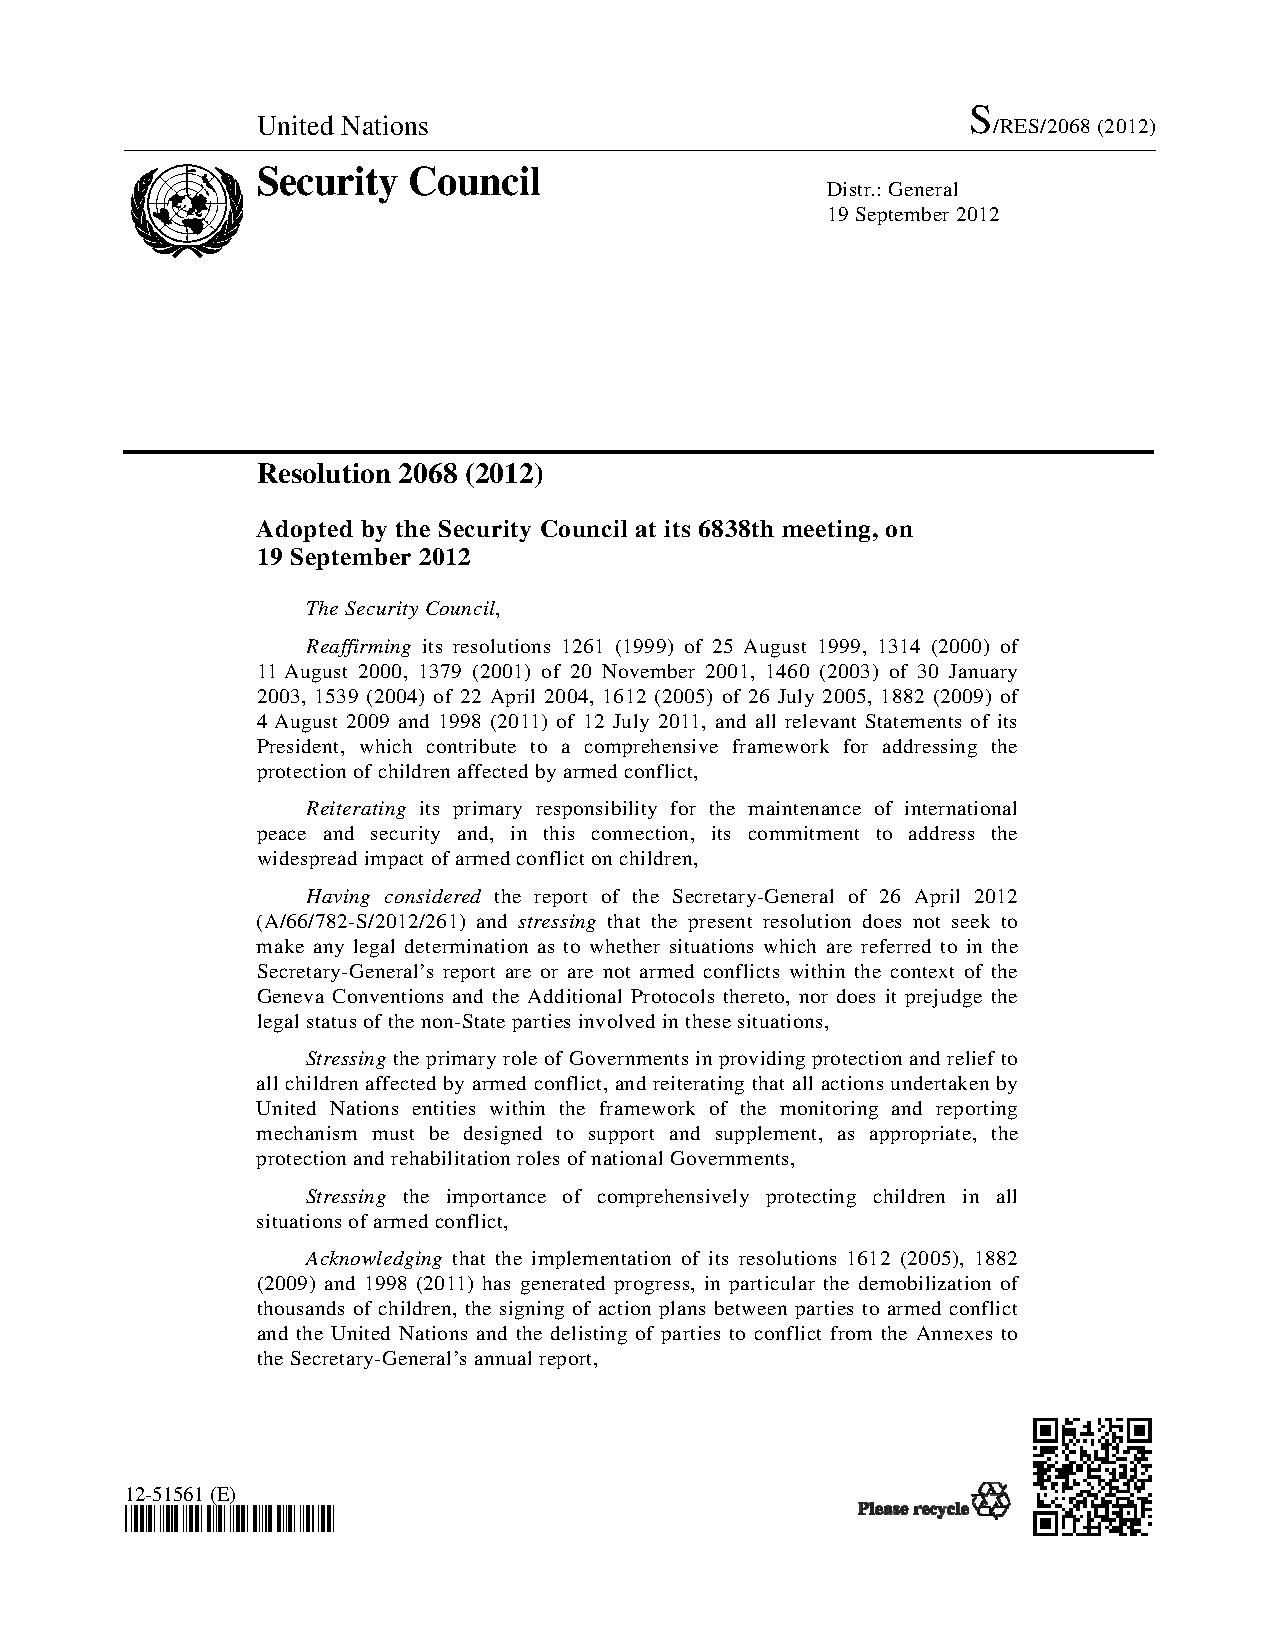 united nations general assembly resolution 2334 pdf